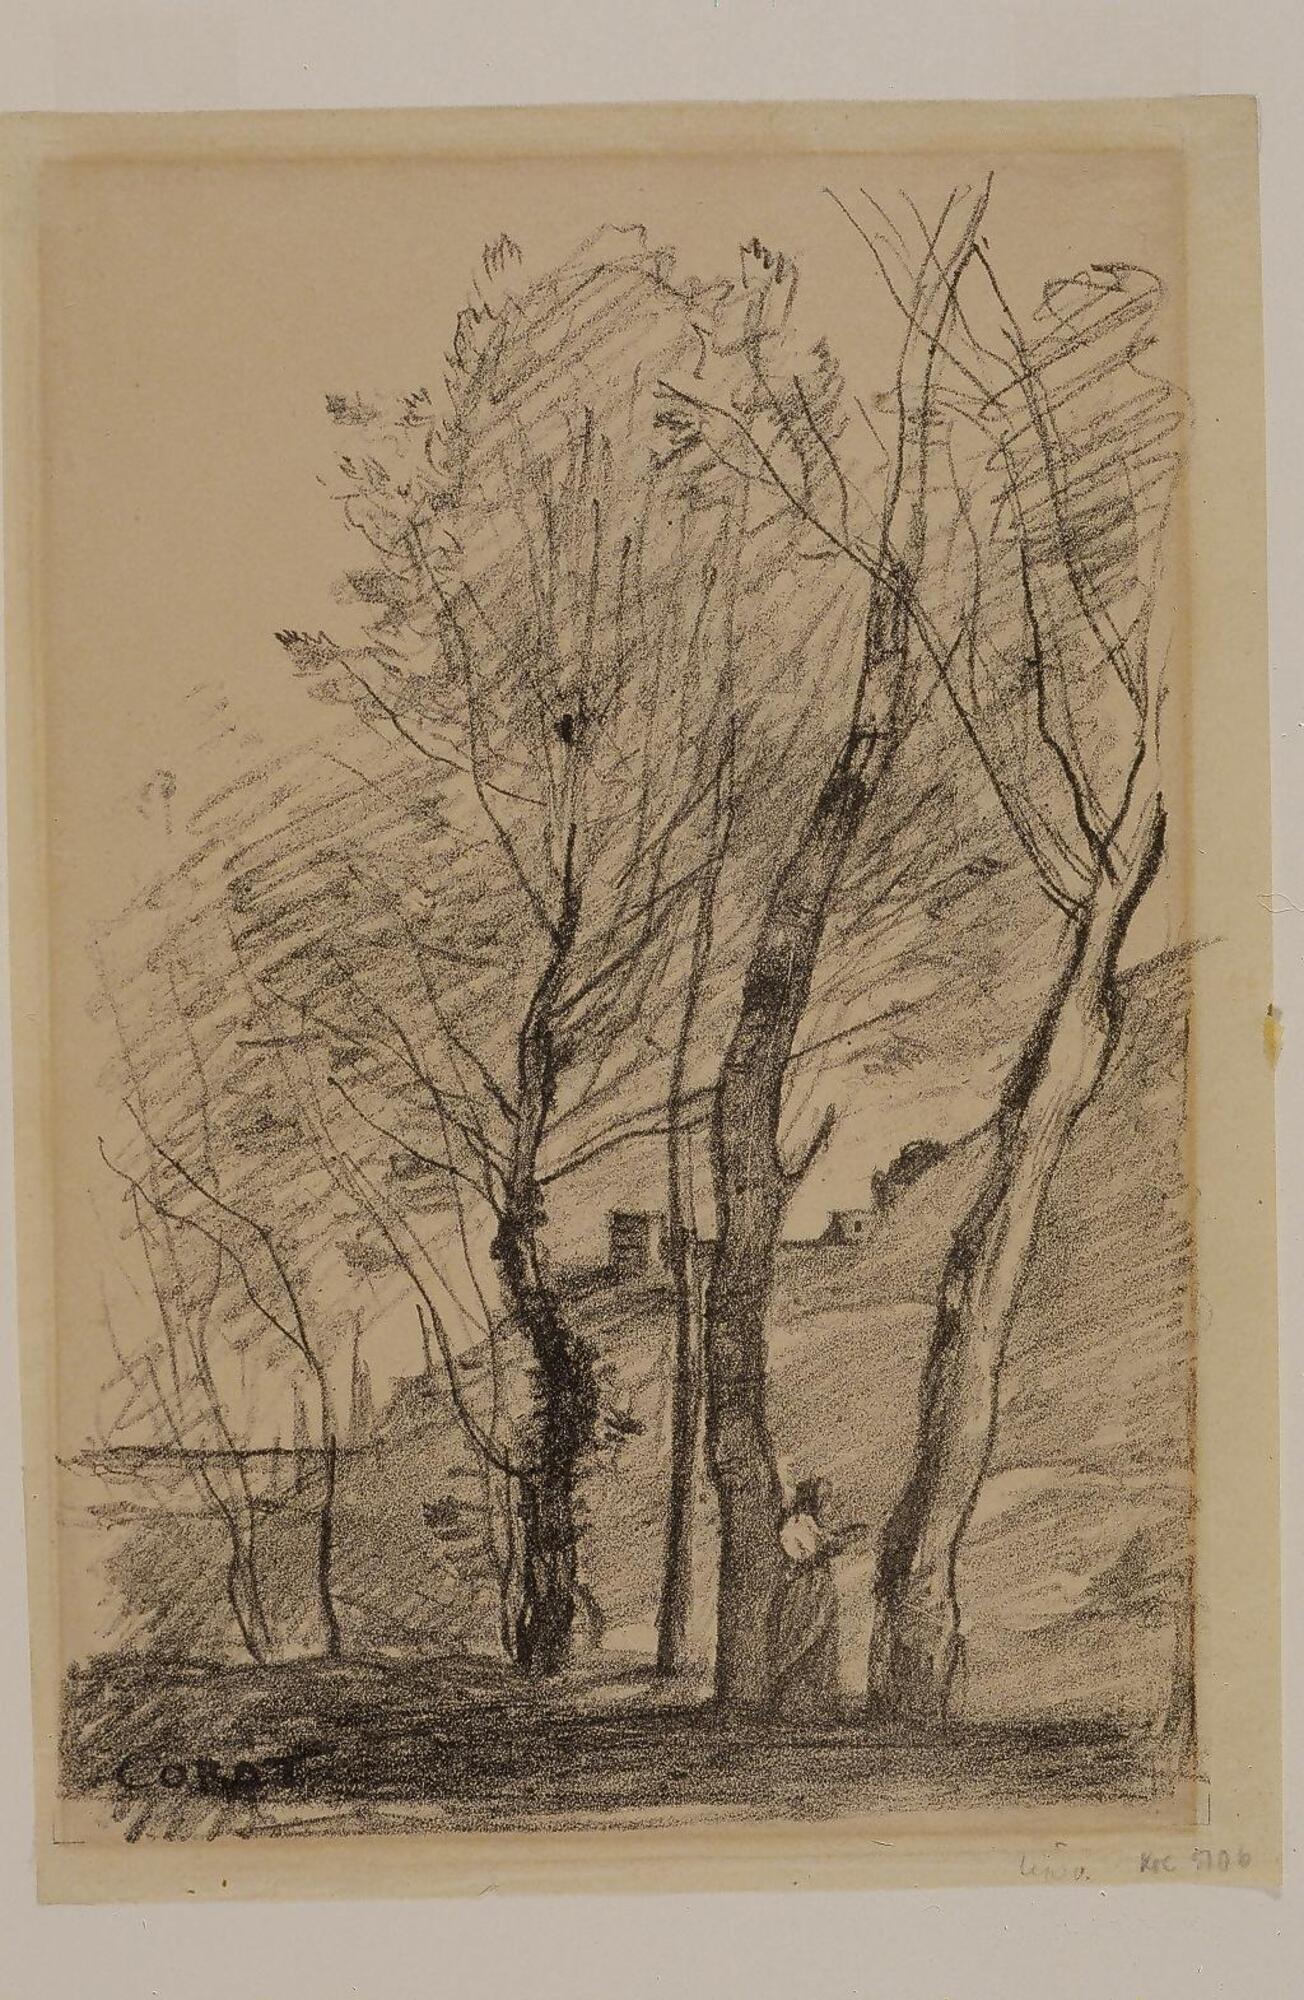 A sketch of a hillside in the background, seen through the trees.  The trees heights are low on the left, leaving the left corner of the image open, and extending taller towards the top of the page as they move right.  Between the far right tree and the second to the right is a woman, about 1/5 the size of the tree she stands against.  About halfway up the trunk, between the same two trees is a square structure with one darkened window in the middle and a dark scribble to the right of it.